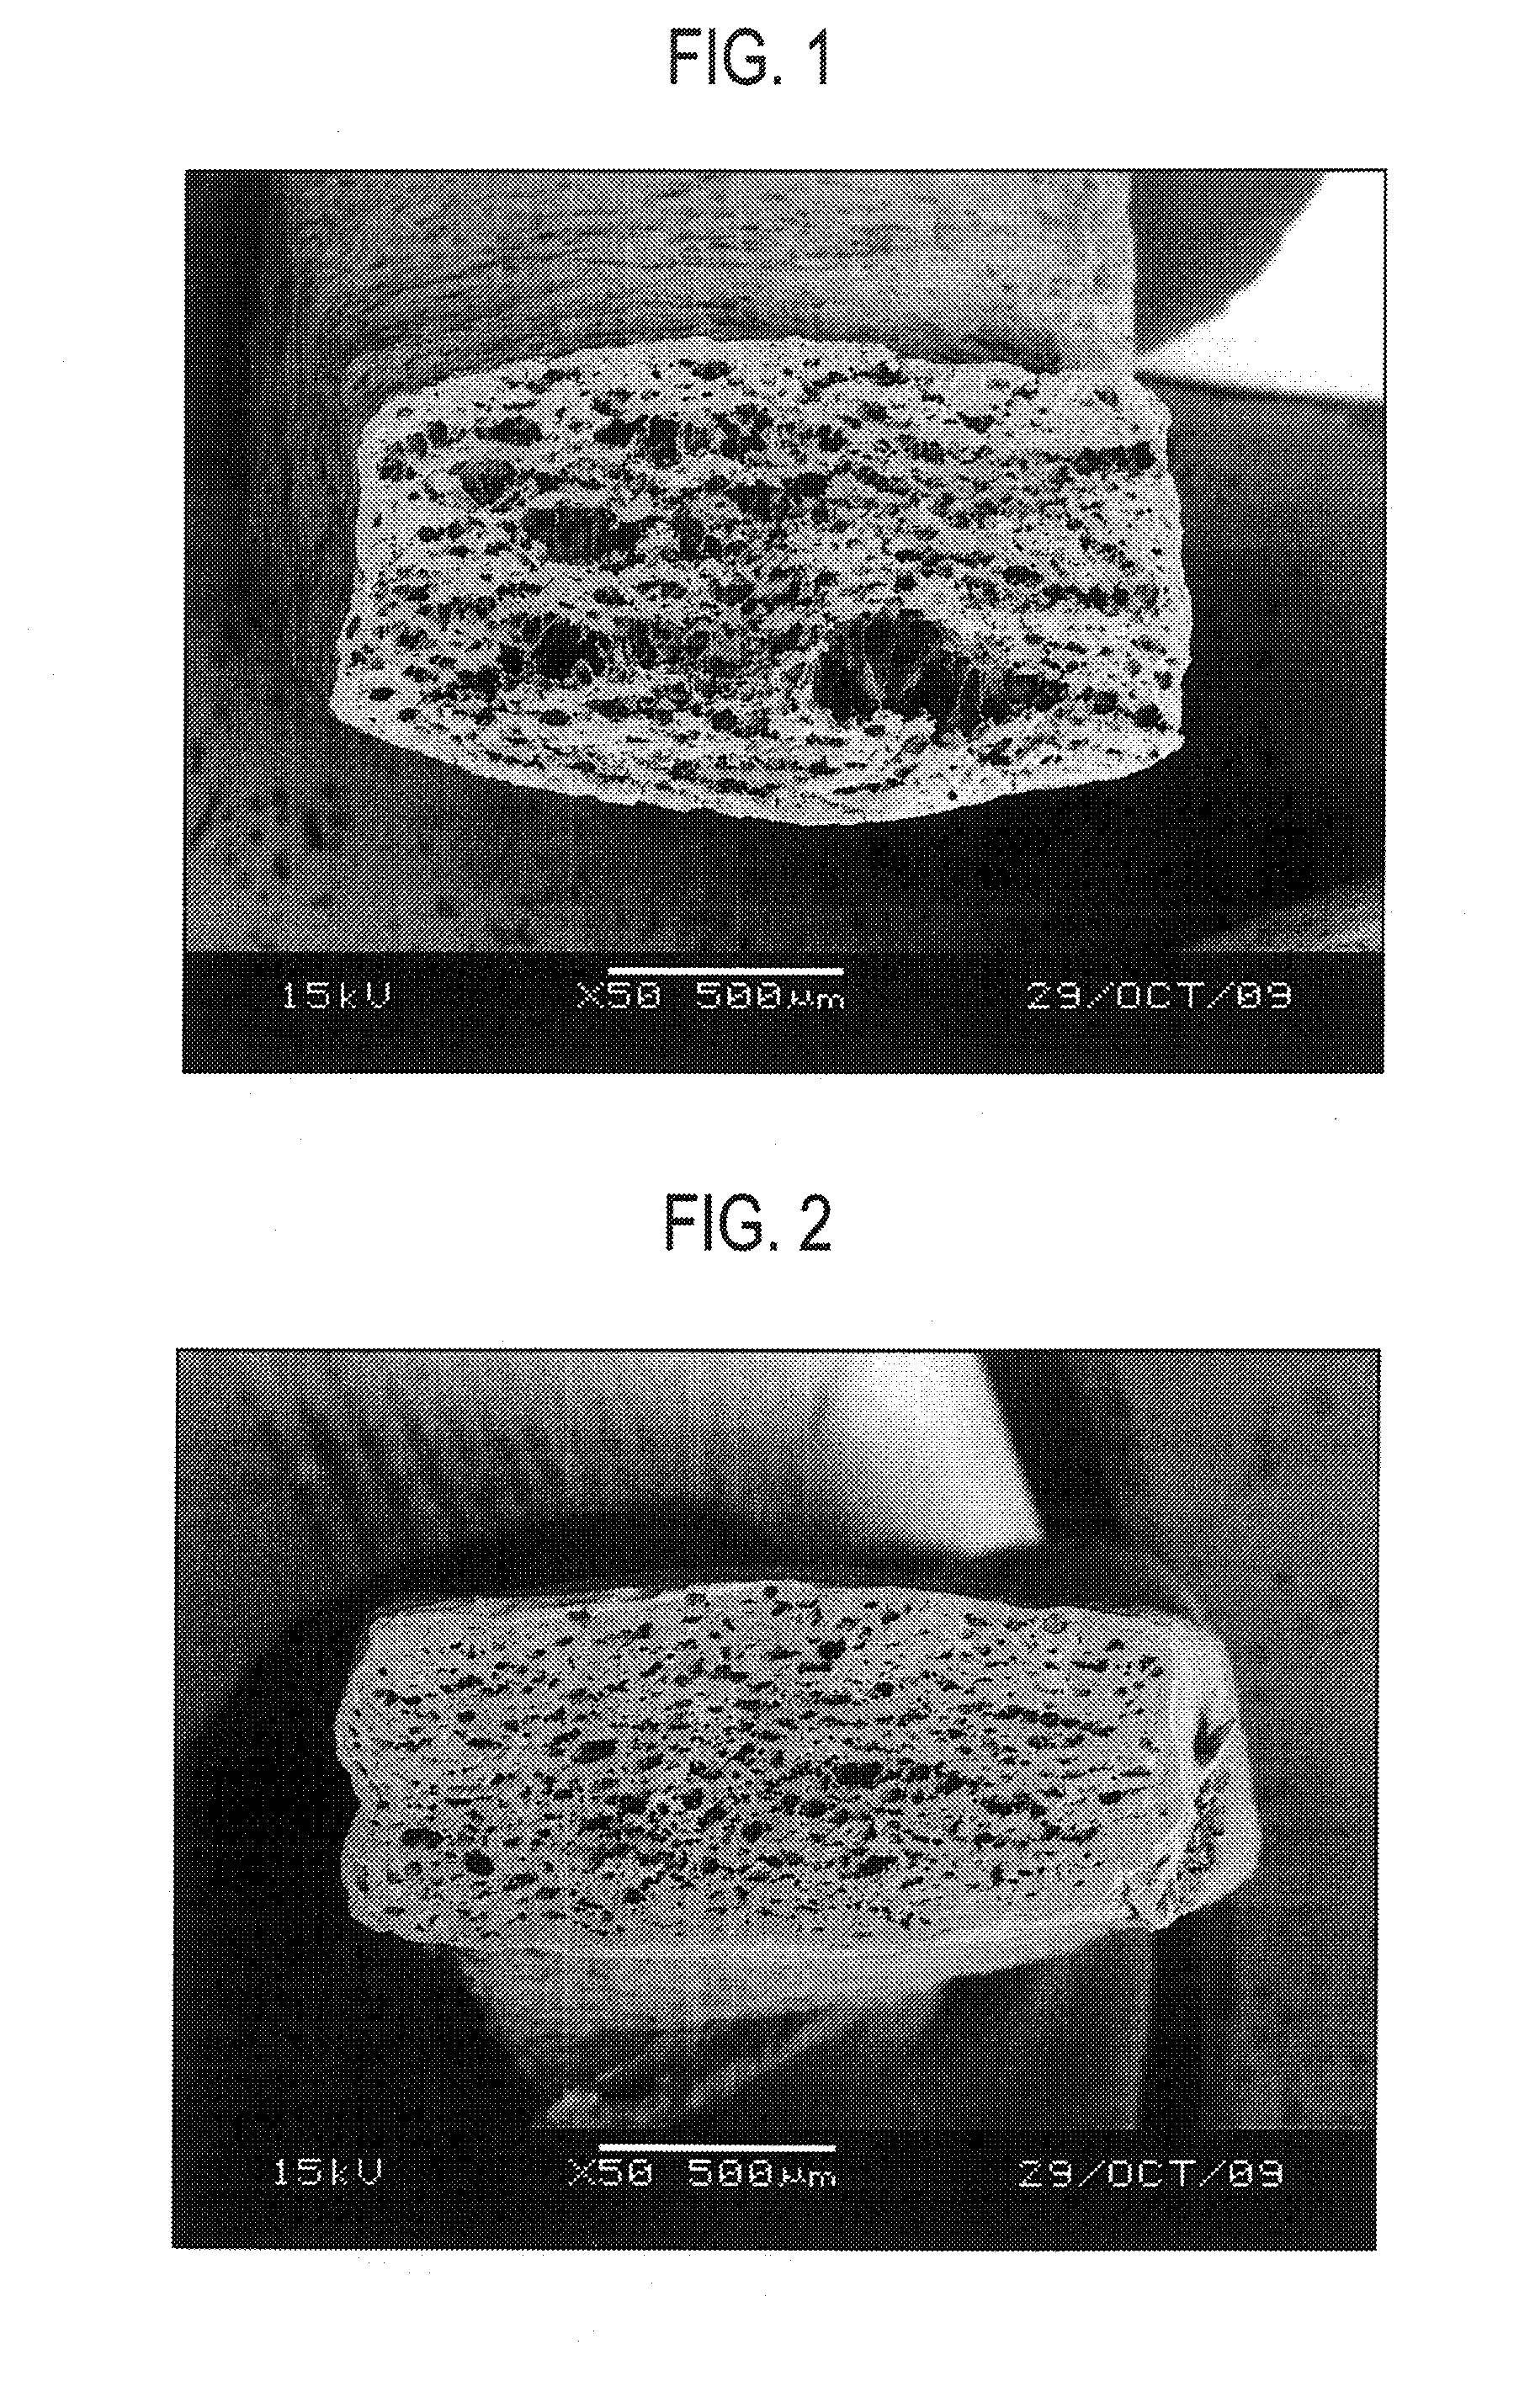 Method for producing instant noodles dried by hot air stream at high temperature